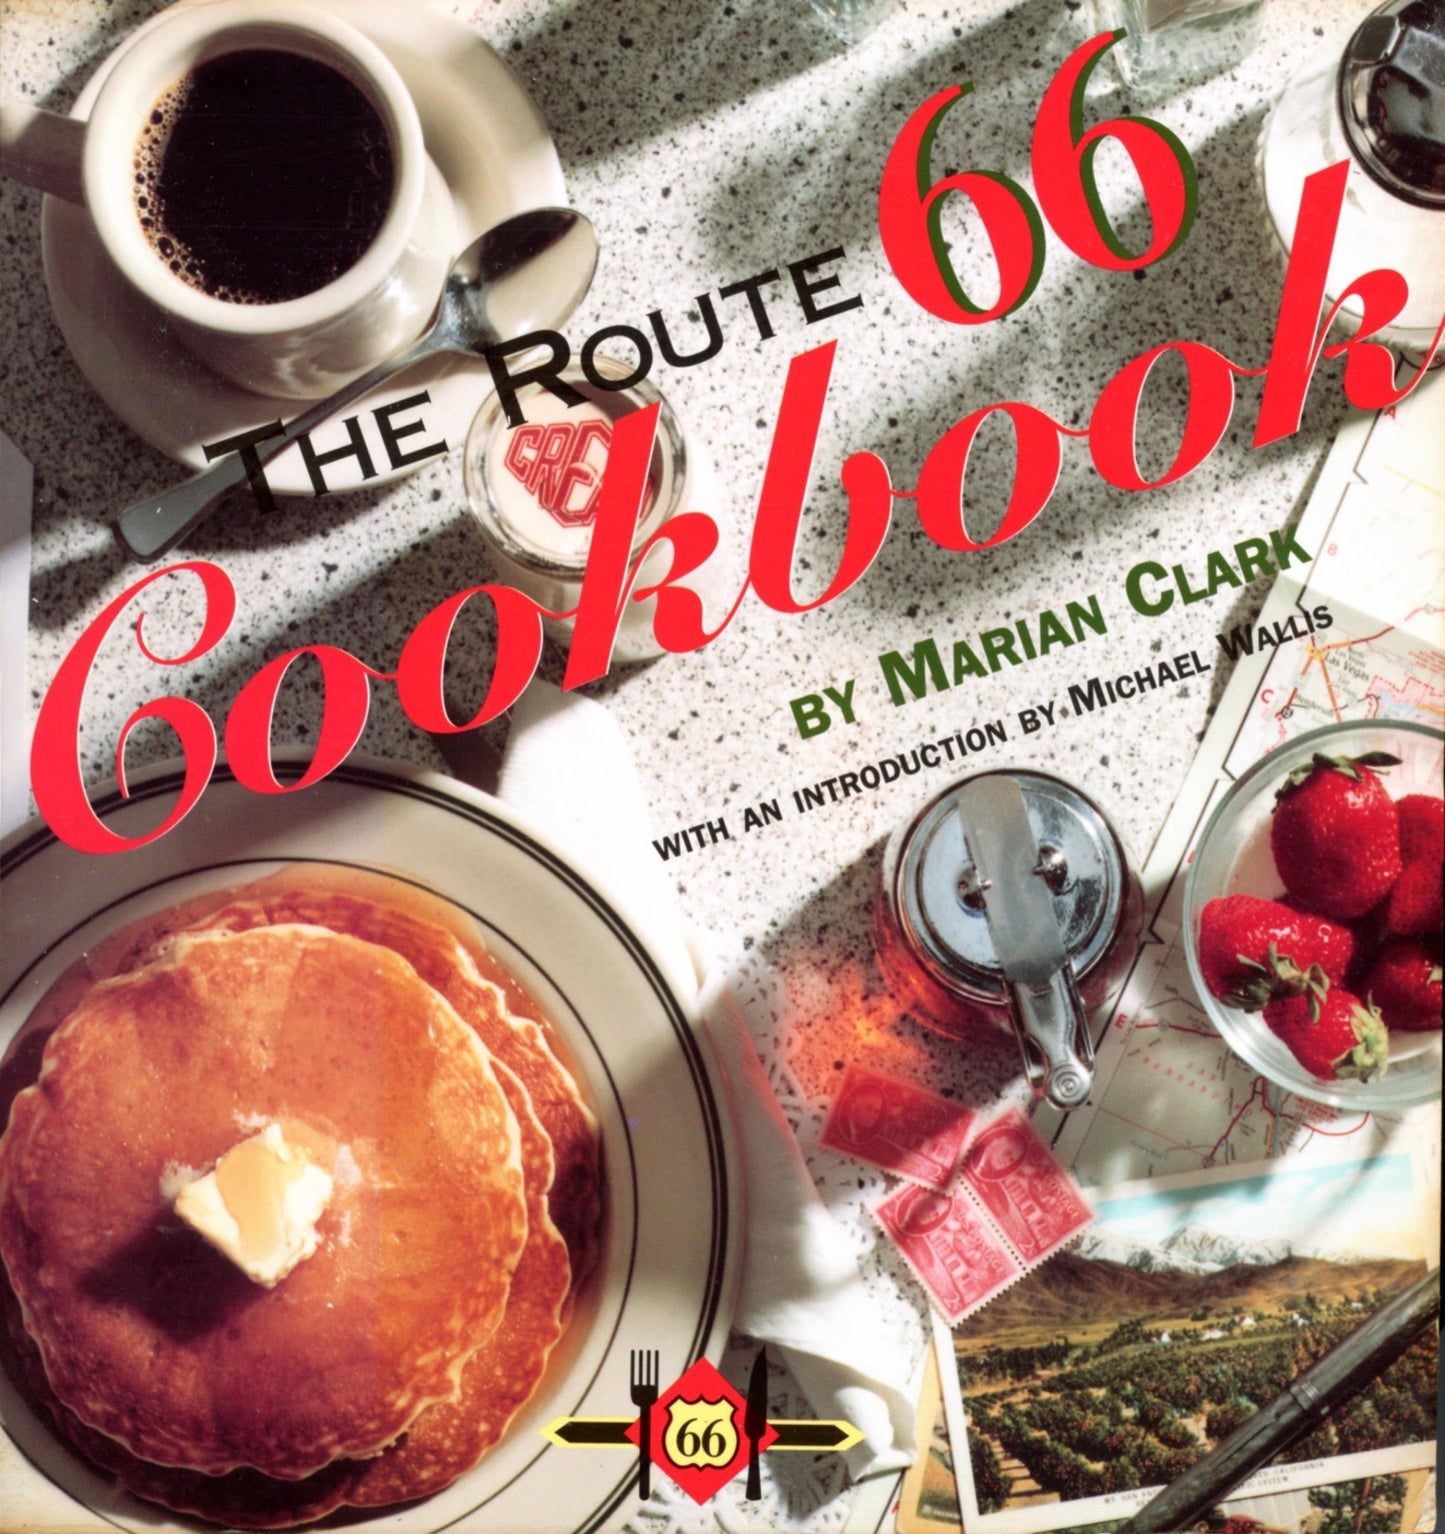 The Route 66 Cookbook by Marian Clark ©1993